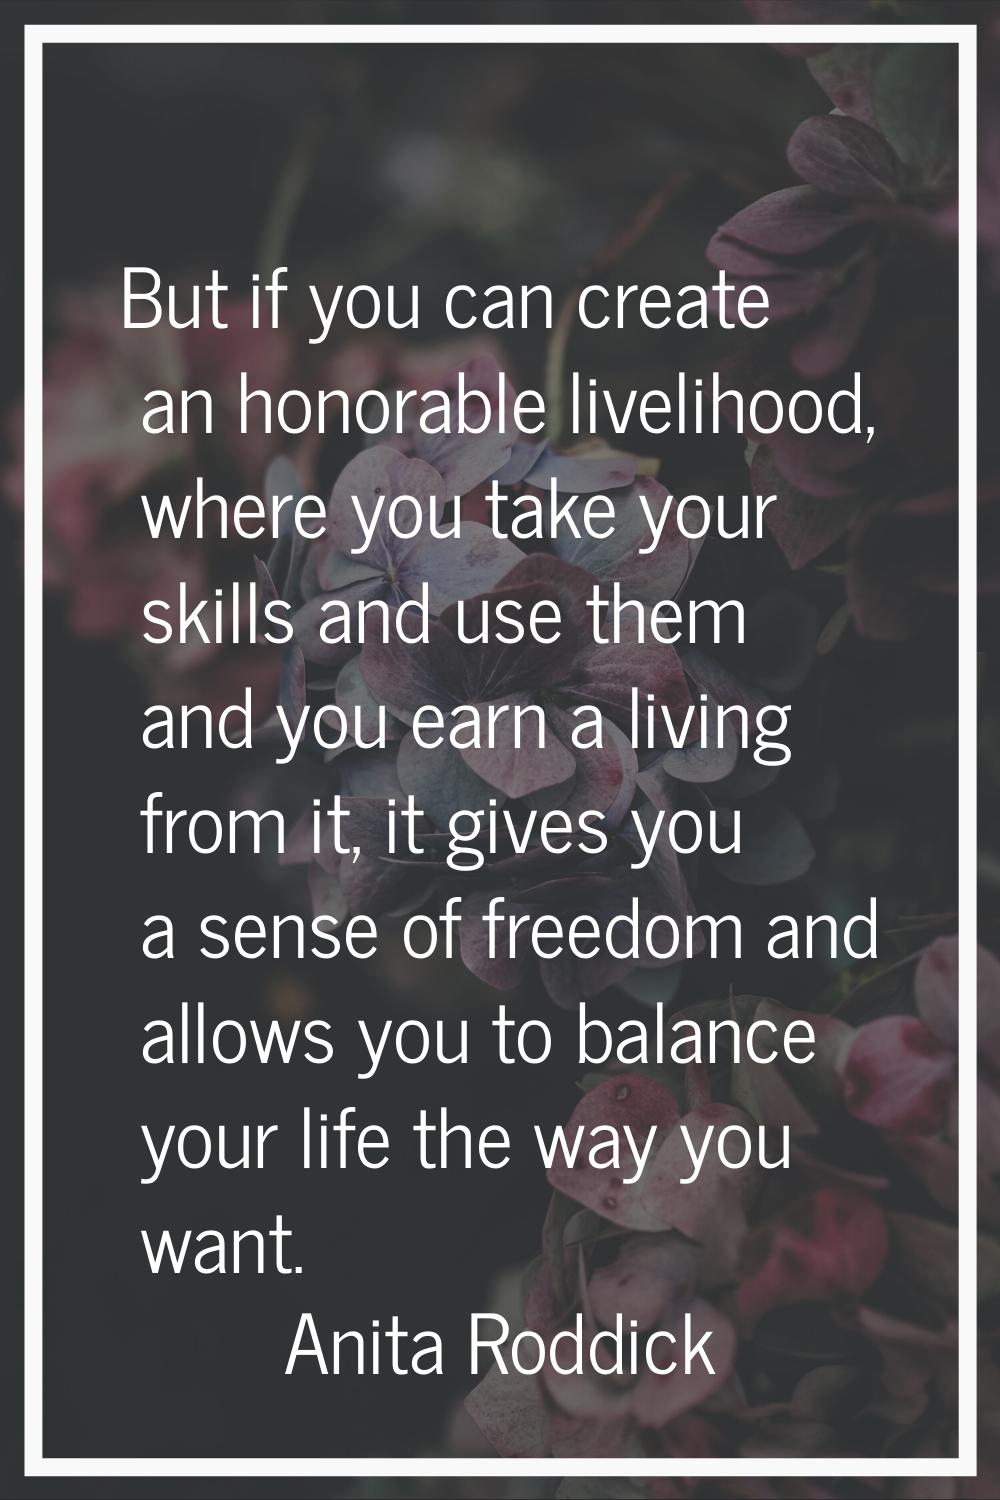 But if you can create an honorable livelihood, where you take your skills and use them and you earn